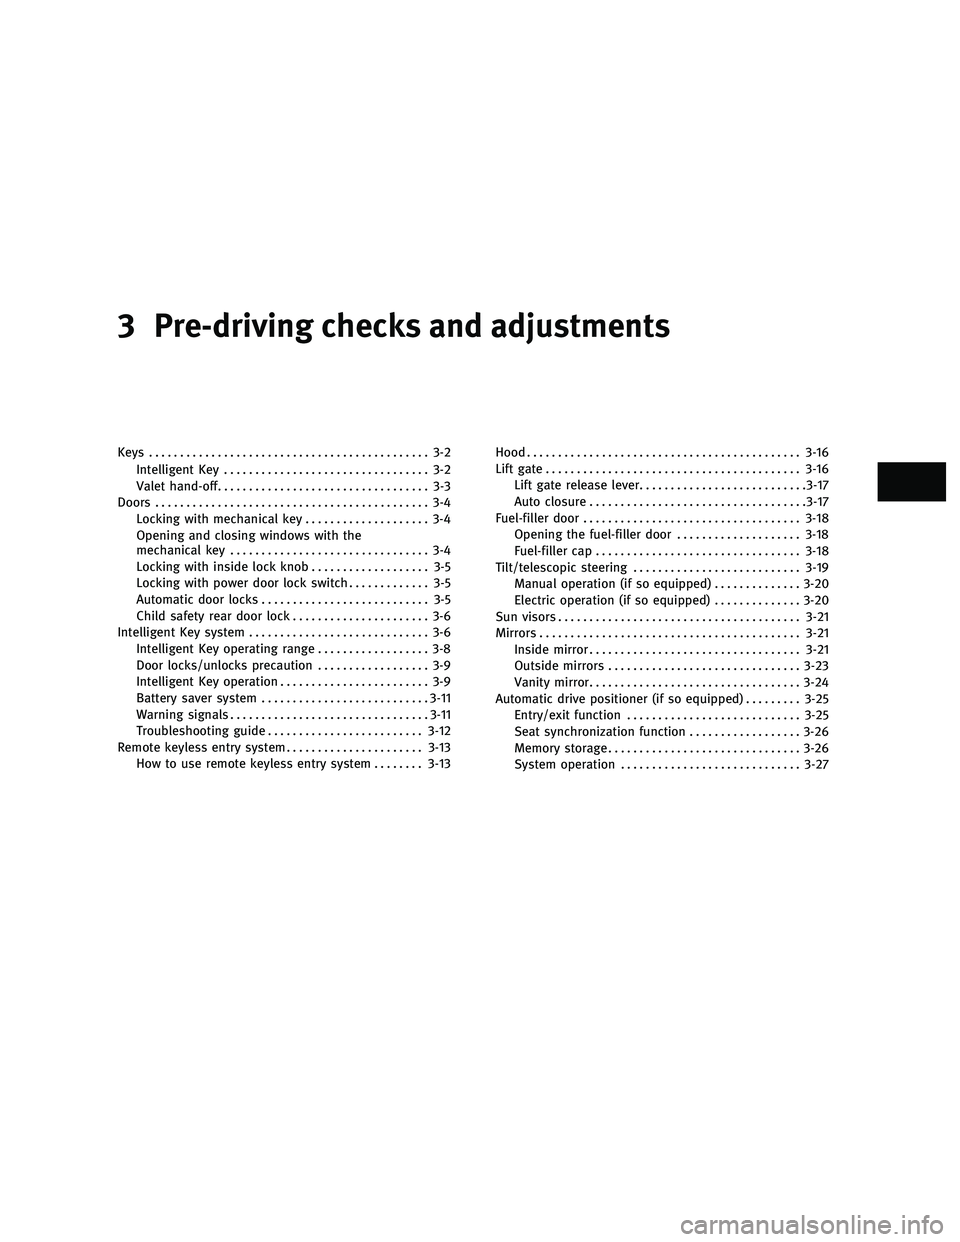 INFINITI FX 2010  Owners Manual 3 Pre-driving checks and adjustments
Keys............................................. 3-2
Intelligent Key ................................. 3-2
Valet hand-off .................................. 3-3
D